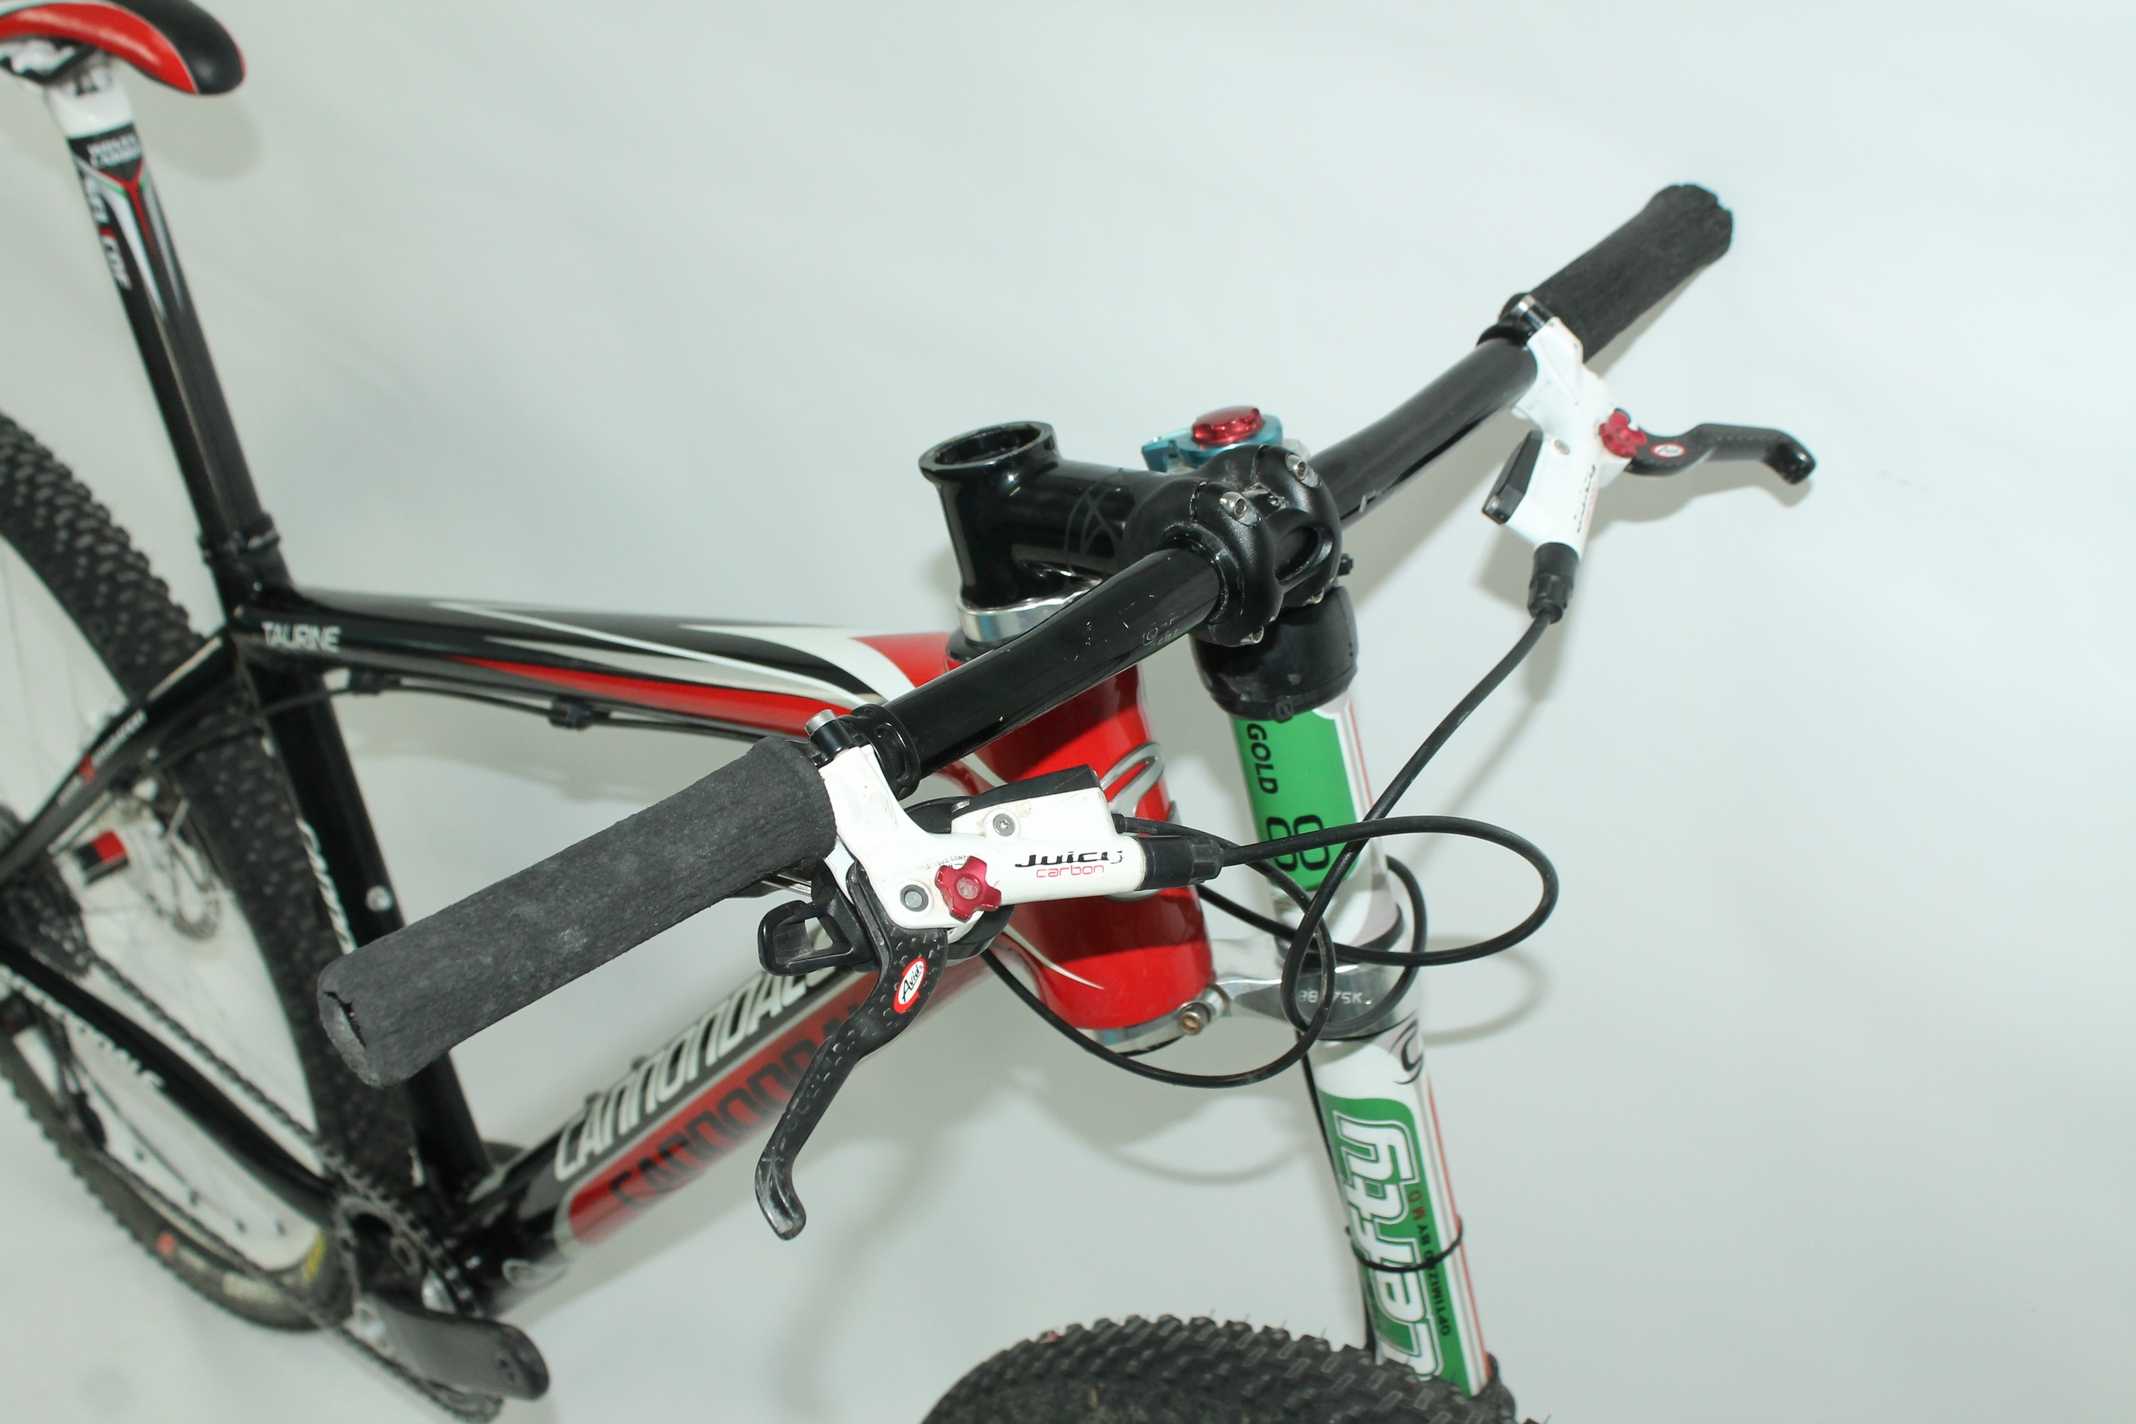 Cannondale Taurine Carbon